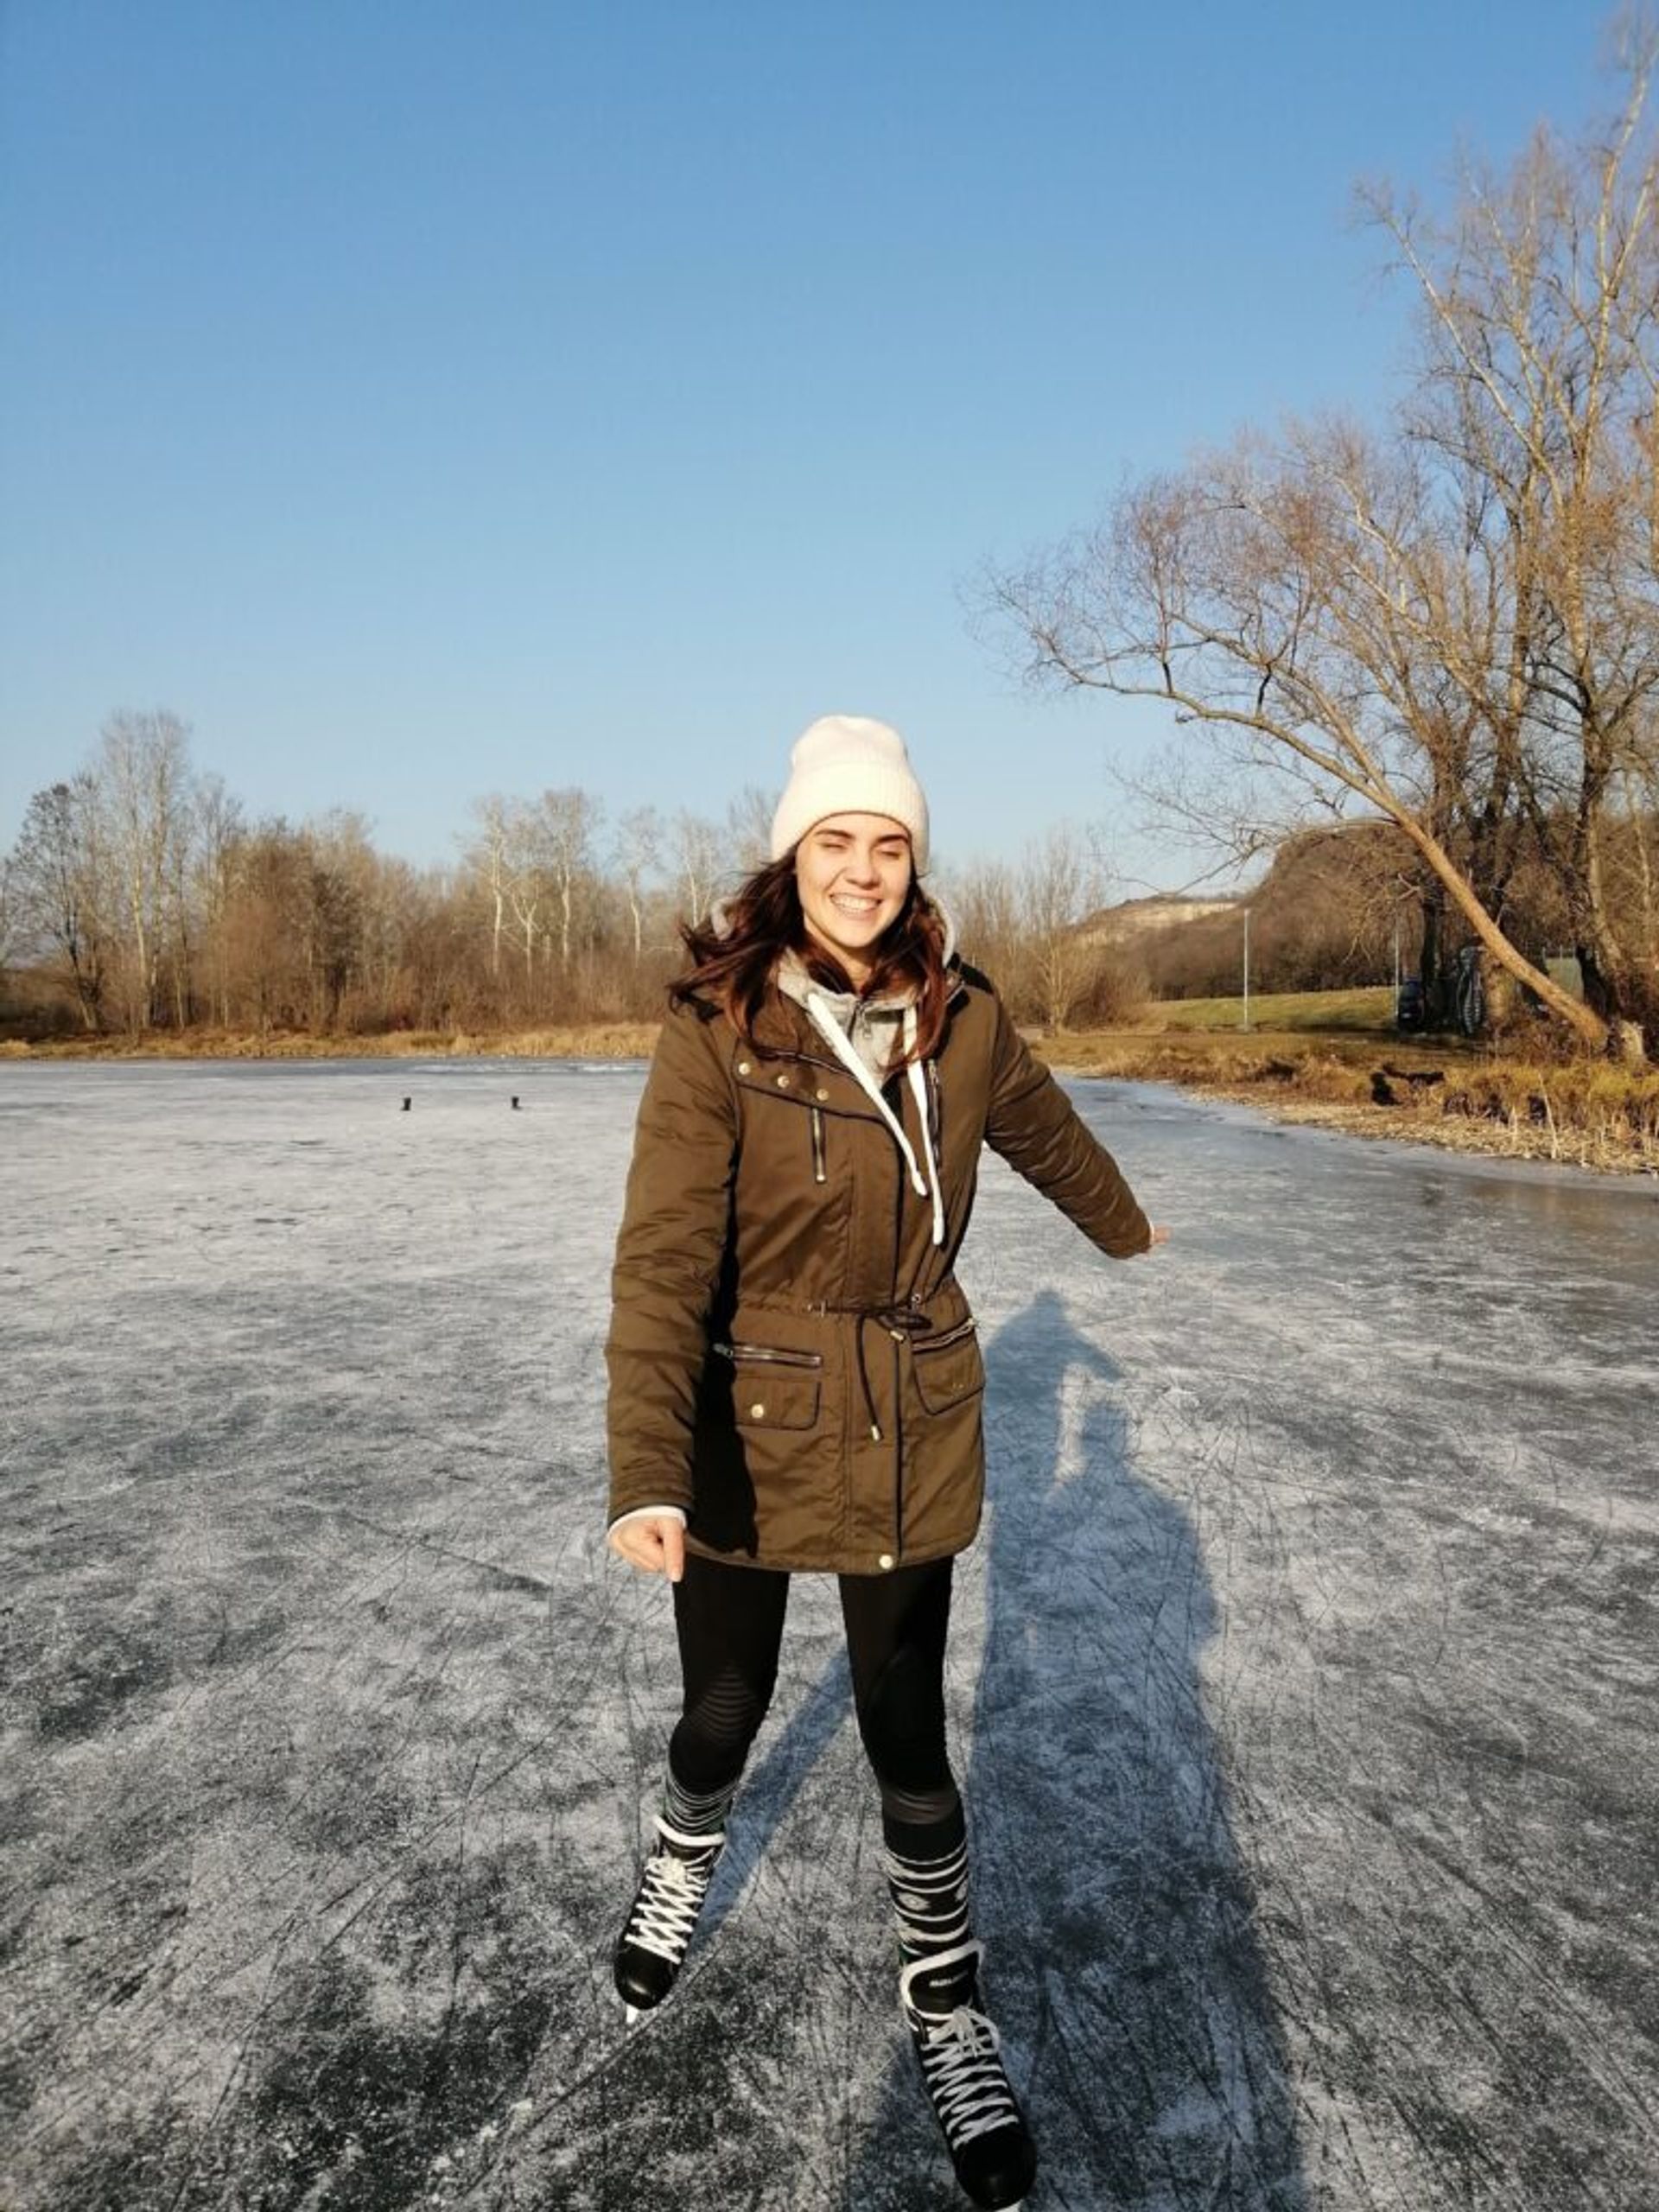 Girl laughing and ice-skating on a frozen lake. 